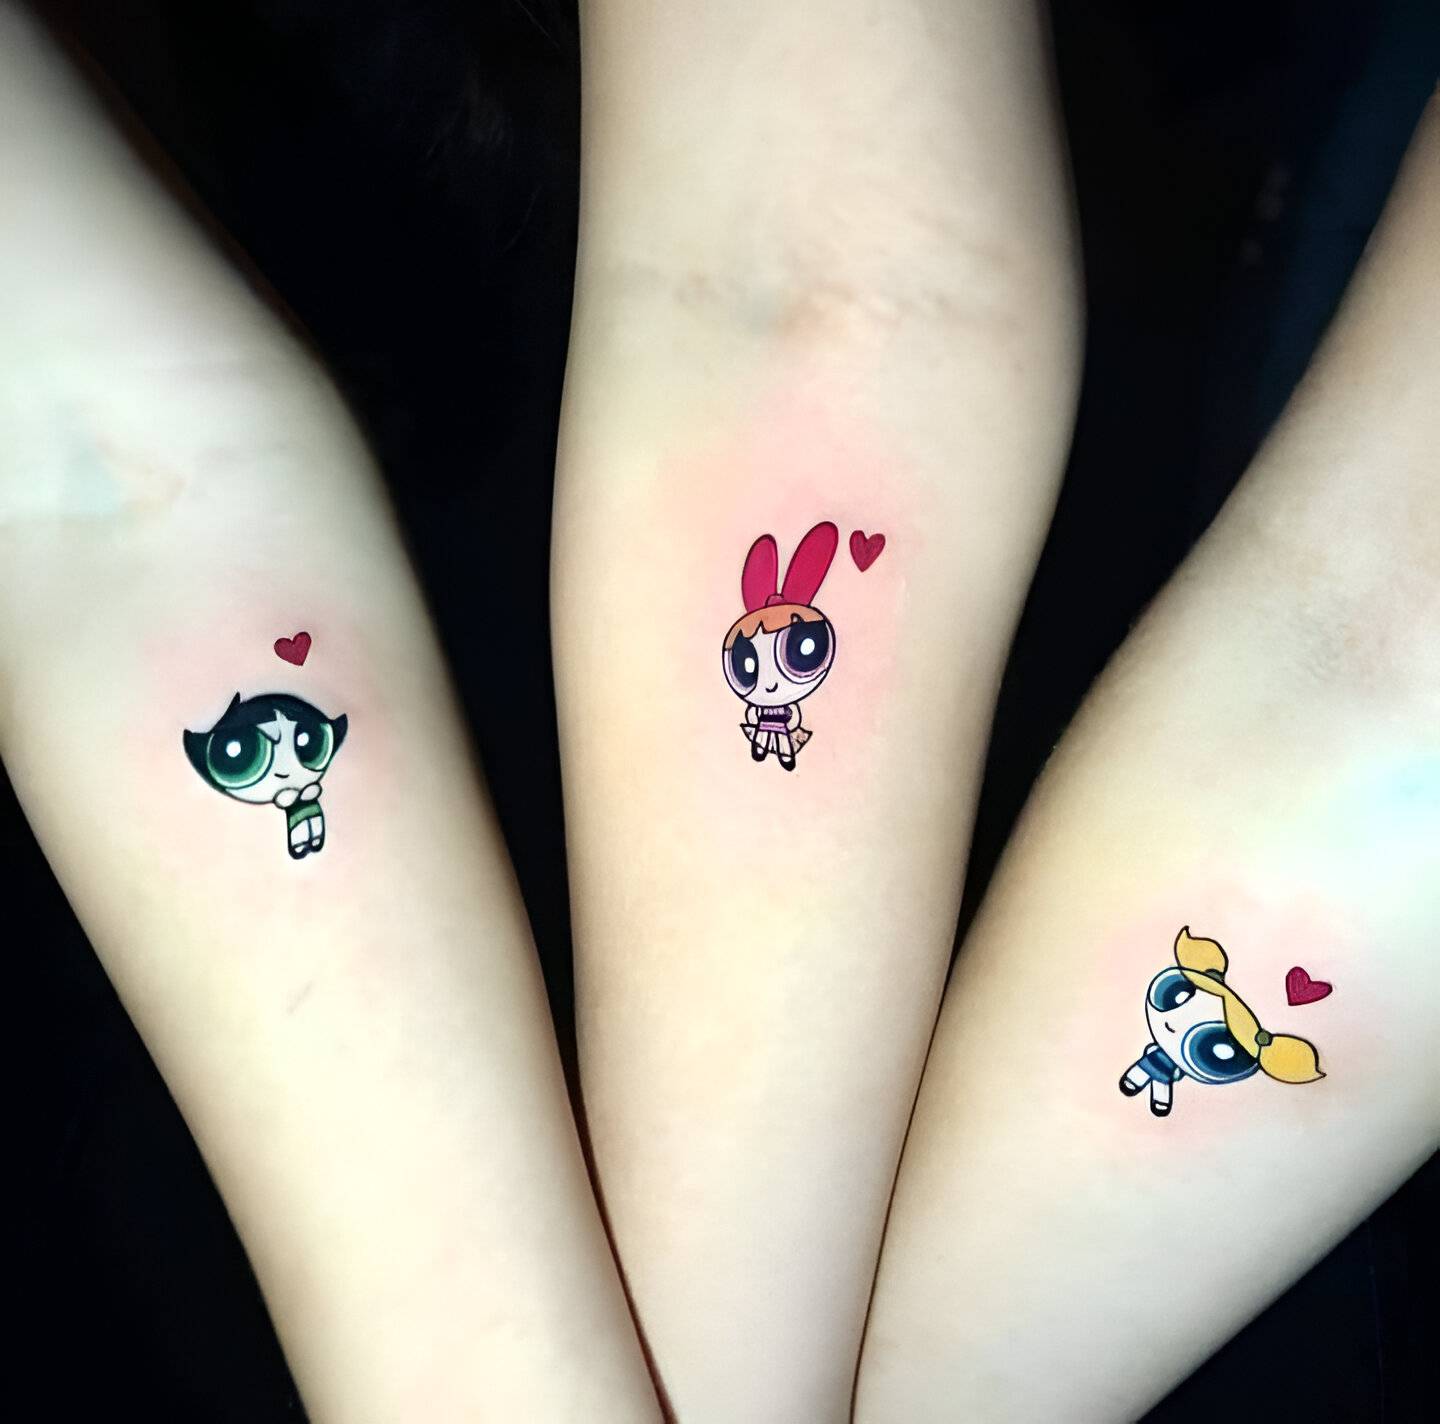 27 Feminine Best Friend Tattoos With The Perfect Elegant Touch 25